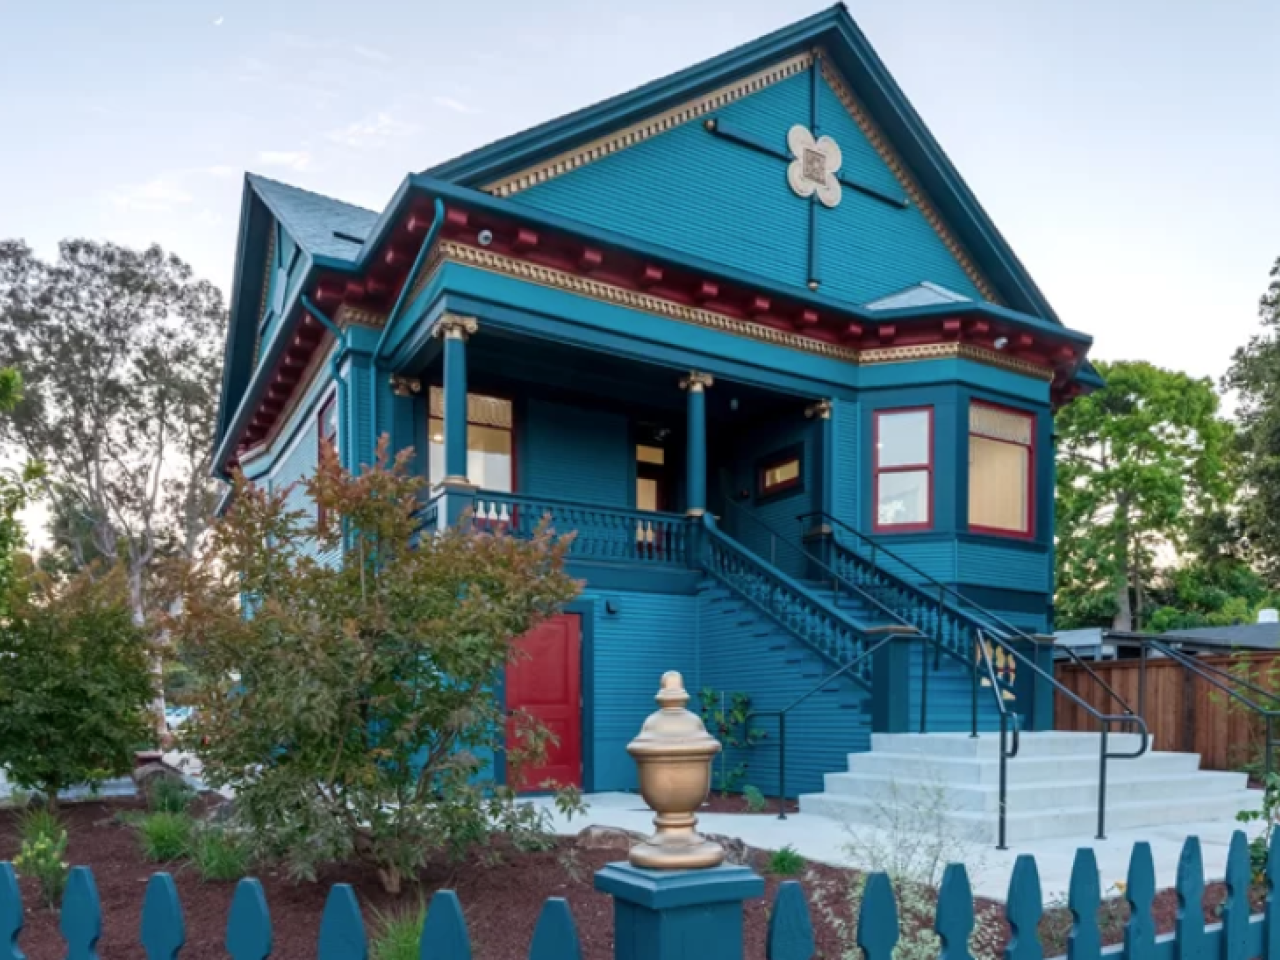 801 River Street is a historic renovation/repurposing project for Housing Matters in Santa Cruz, CA – providing eight units of long-term housing for homeless residents. New Way Homes provided the pre-development funding.